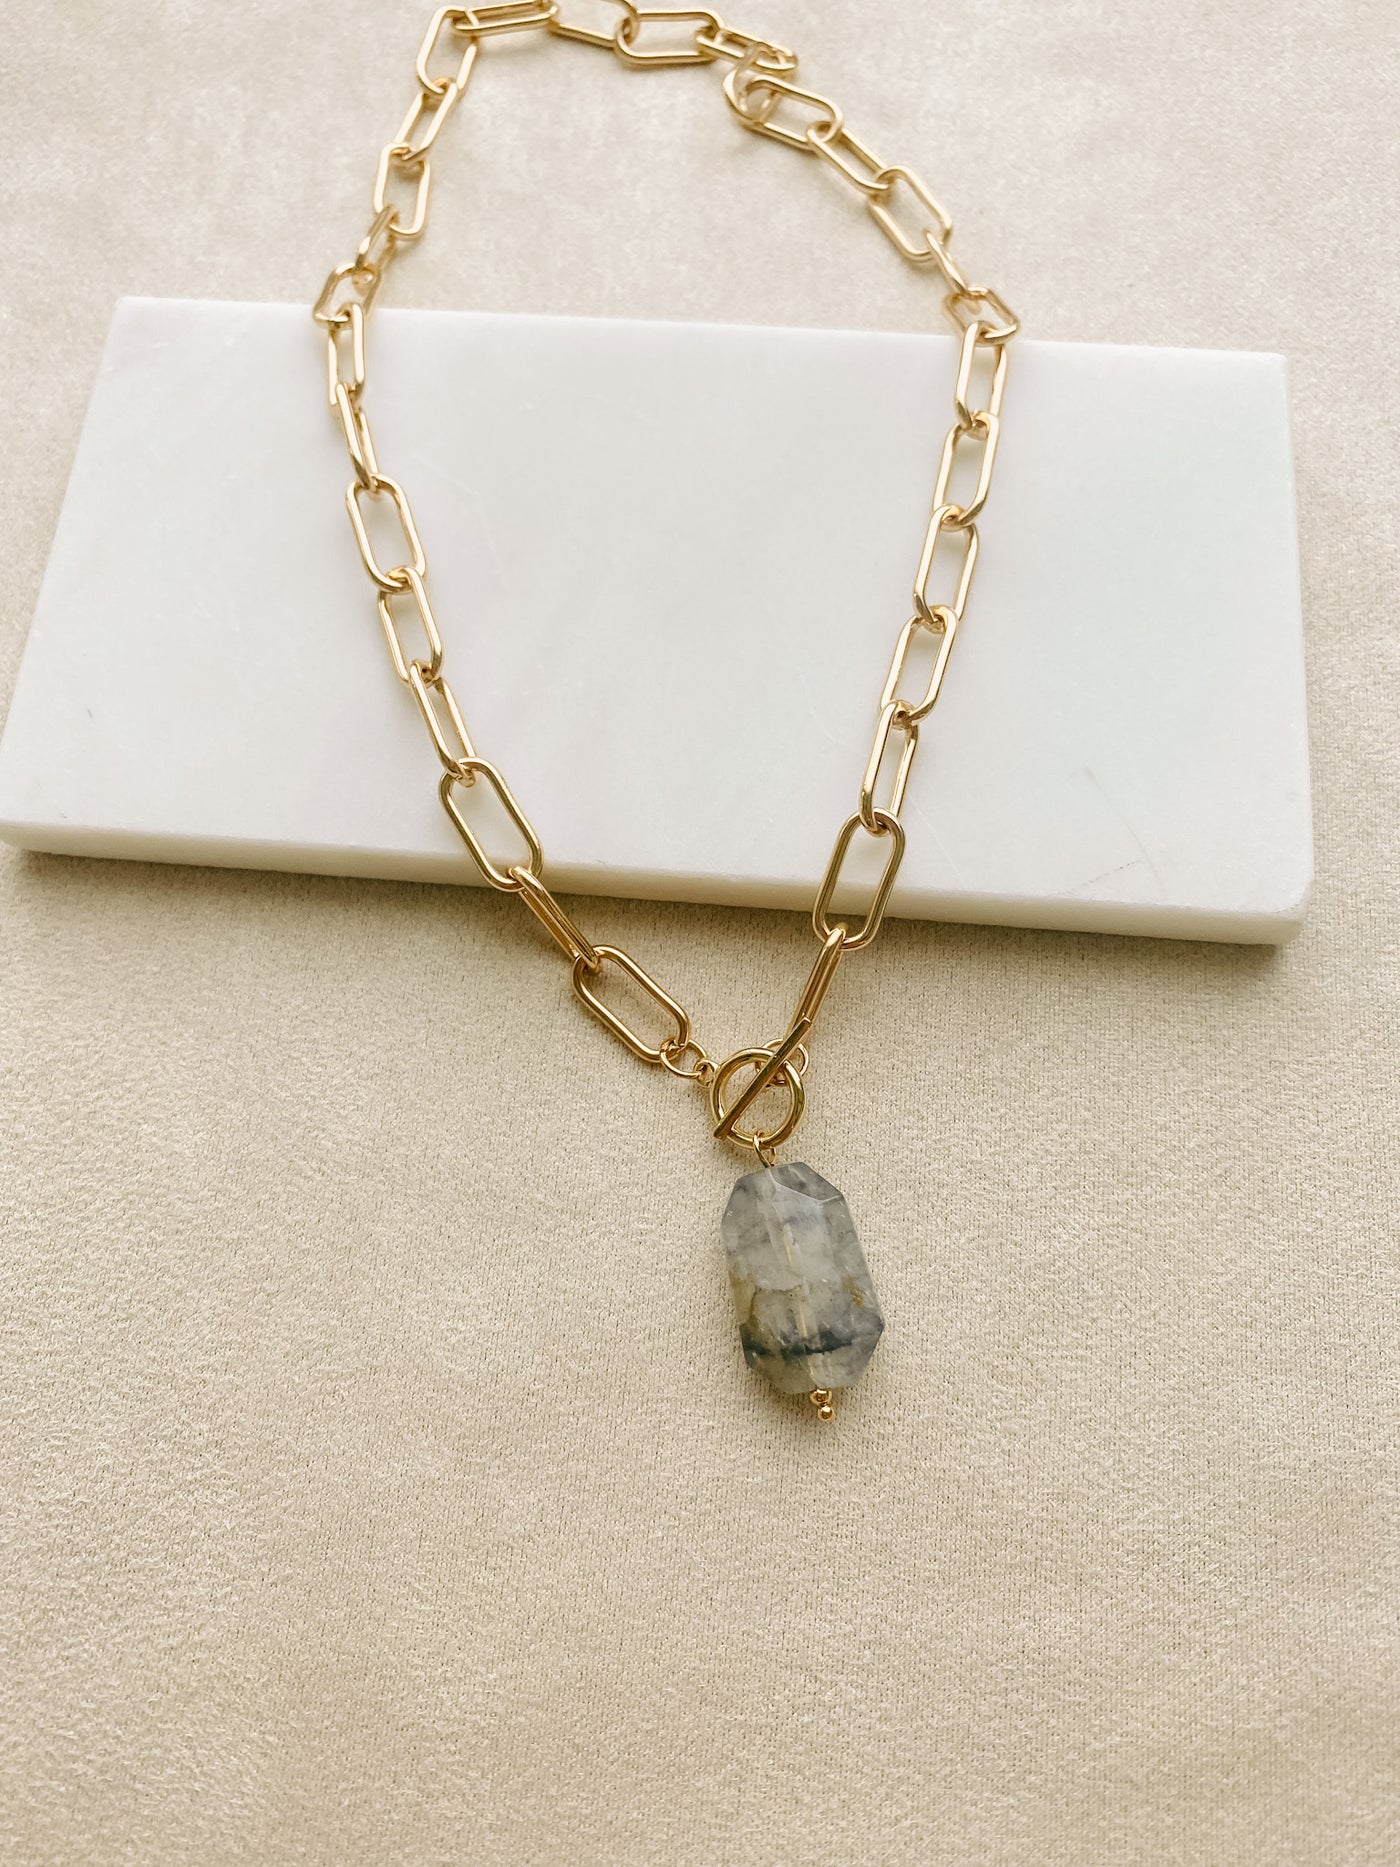 Relaxing My Chi Stone Pendent Necklace (Grey/Gold) - NanaMacs